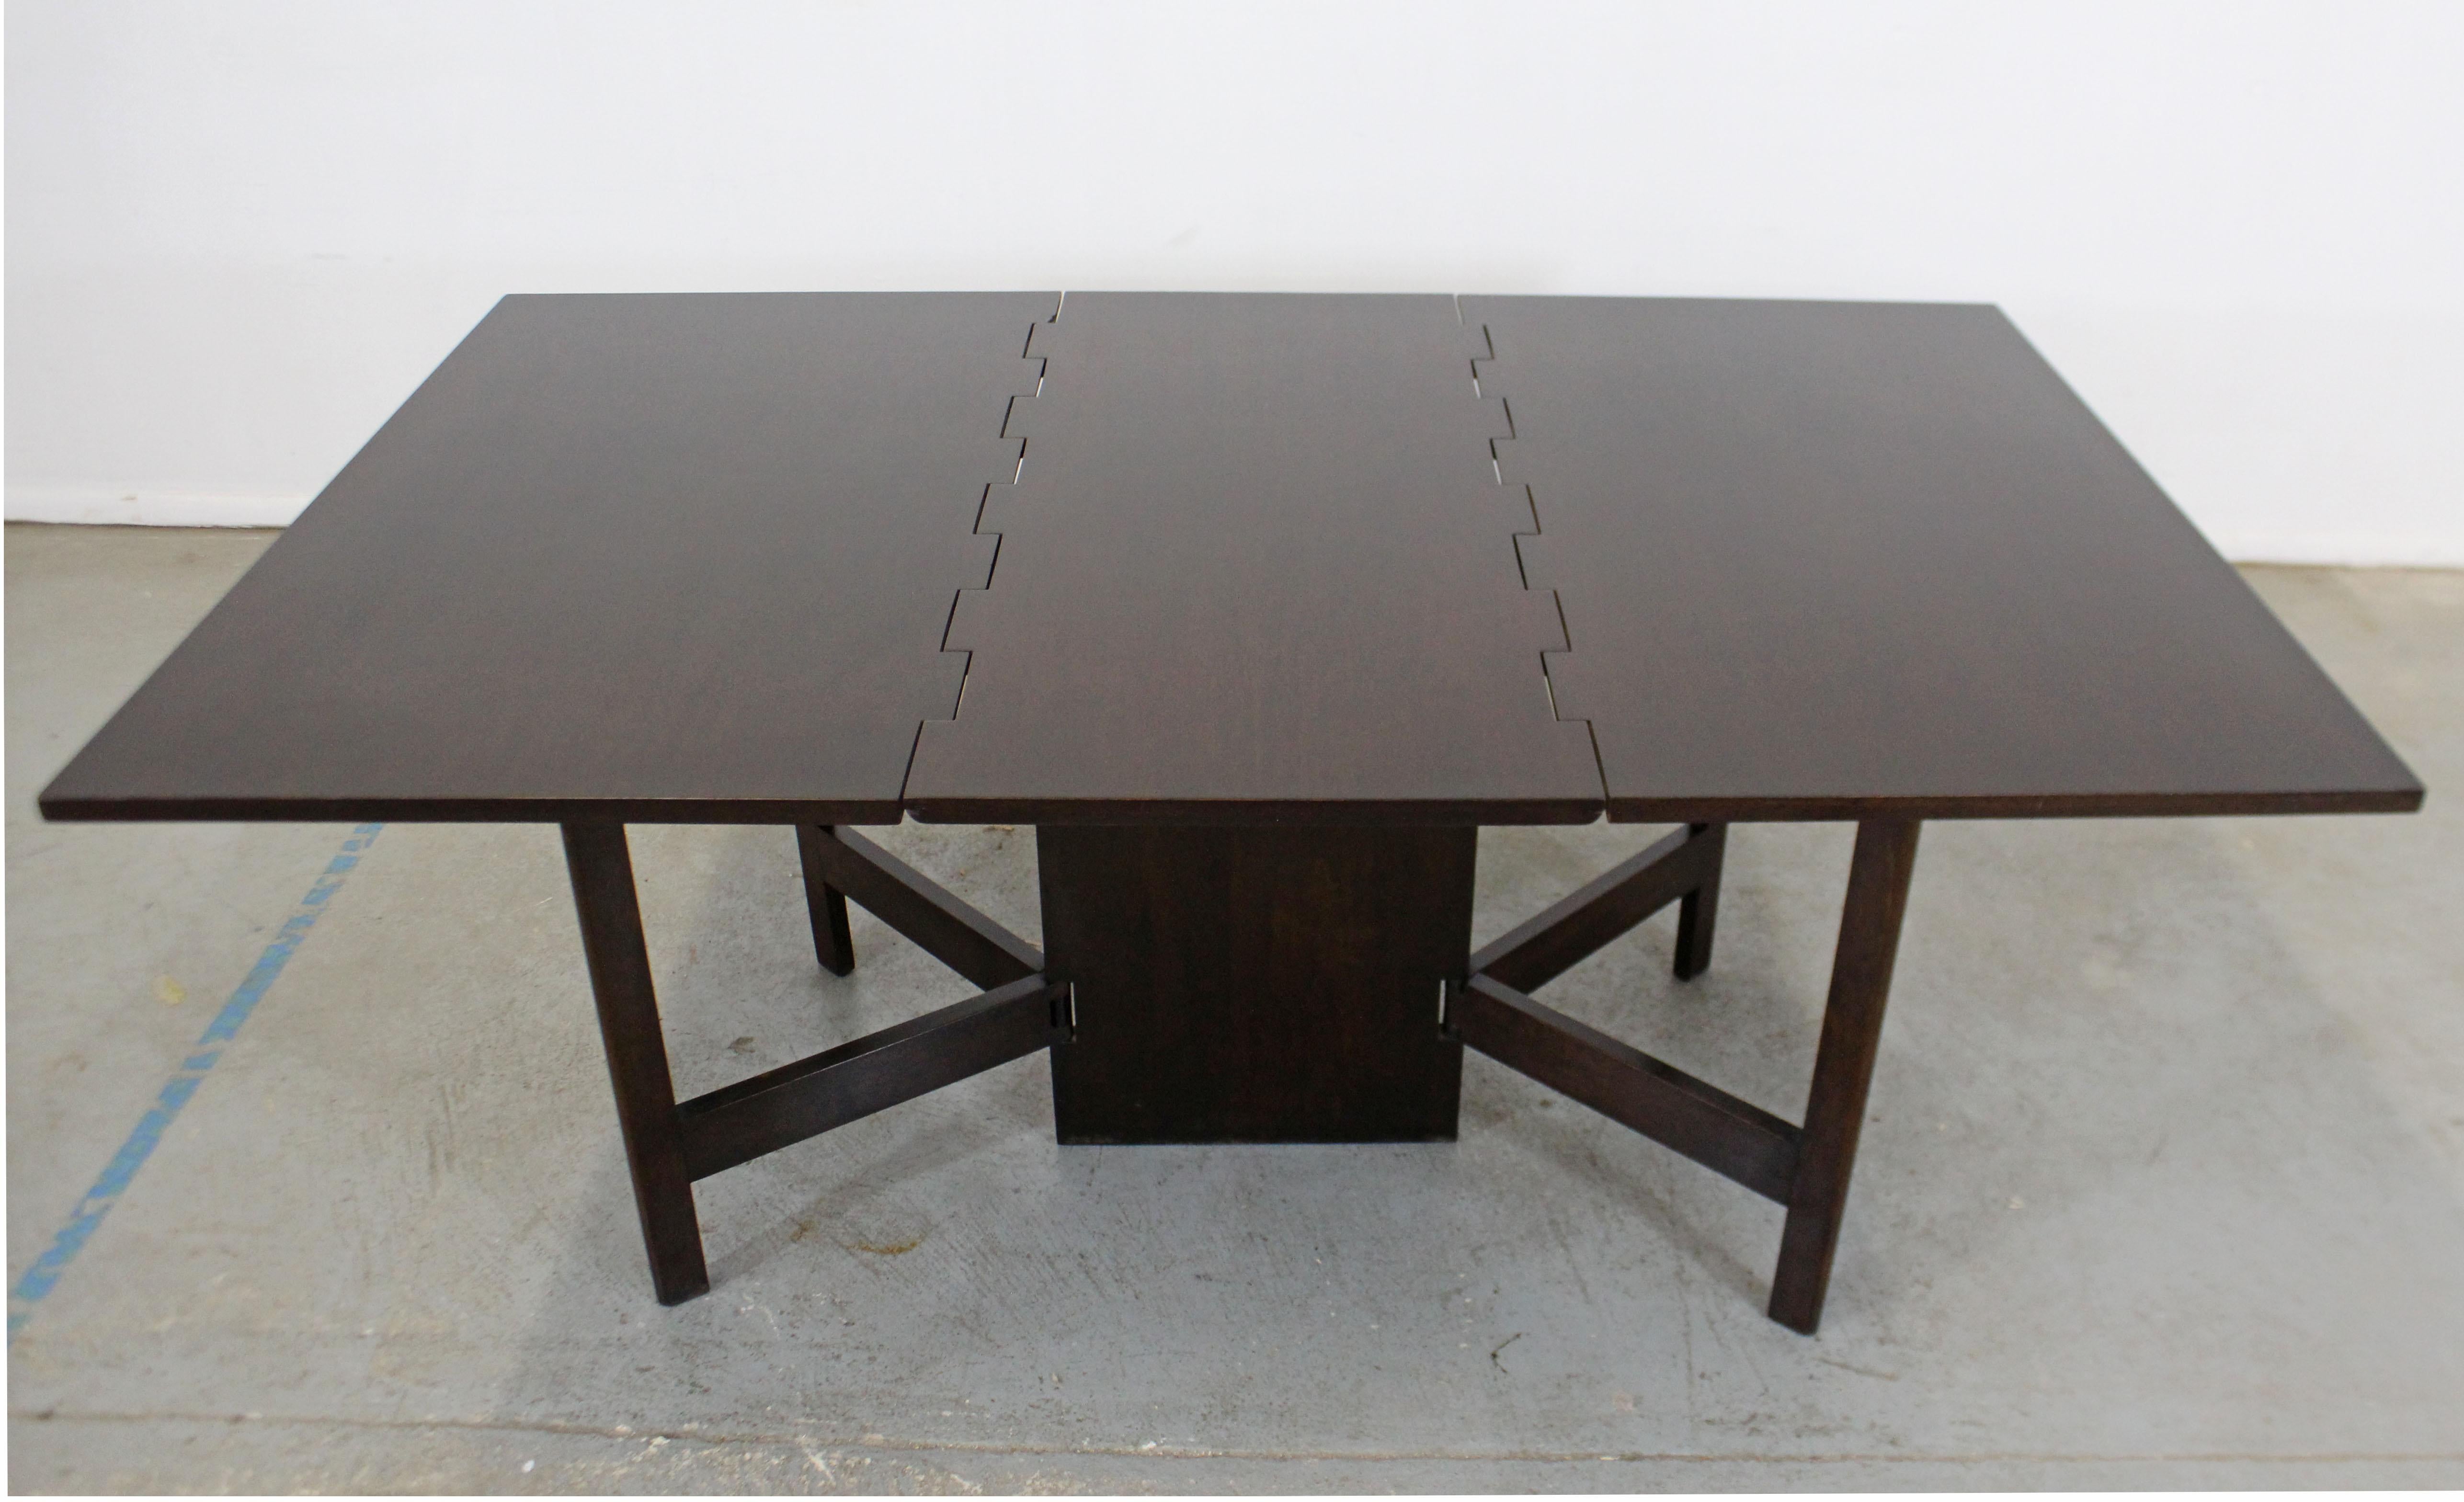 20th Century Mid-Century Modern George Nelson for Herman Miller Drop-Leaf Dining Table